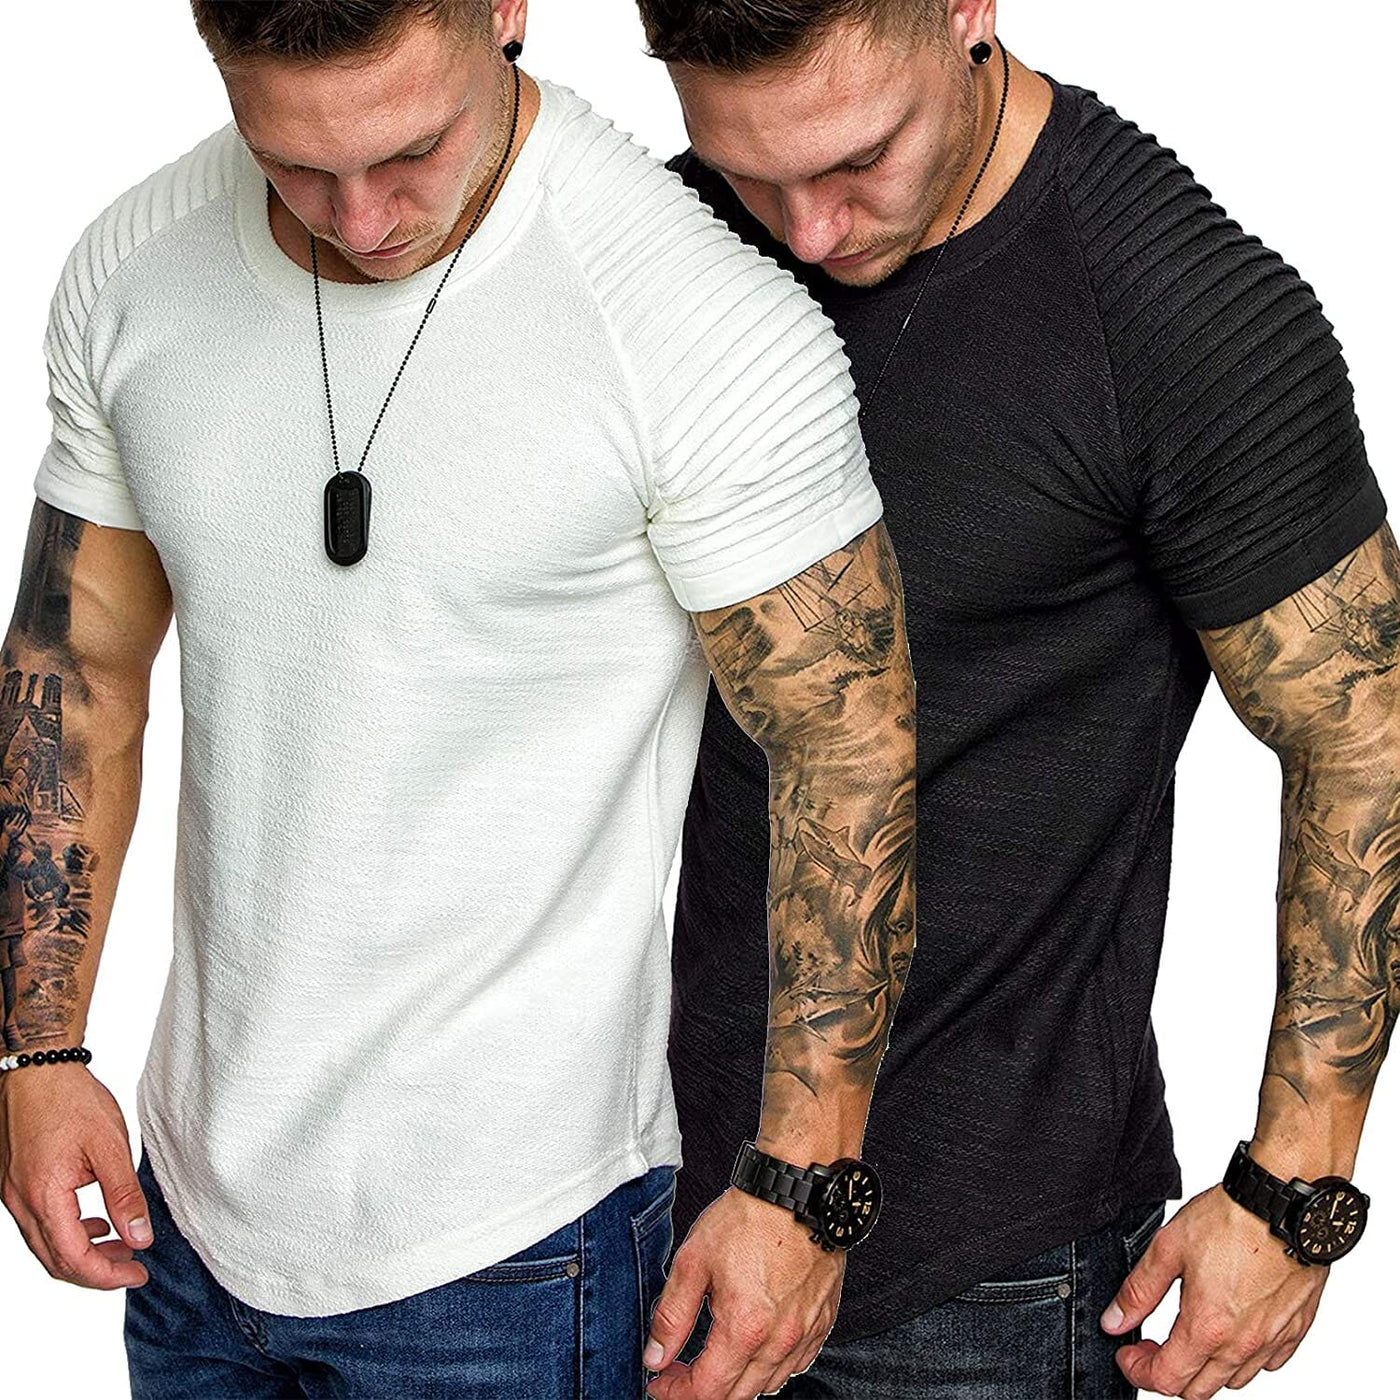 2 Packs Pleats Sleeve Muscle Gym Tee (US Only) T-Shirt COOFANDY Store Black/White S 